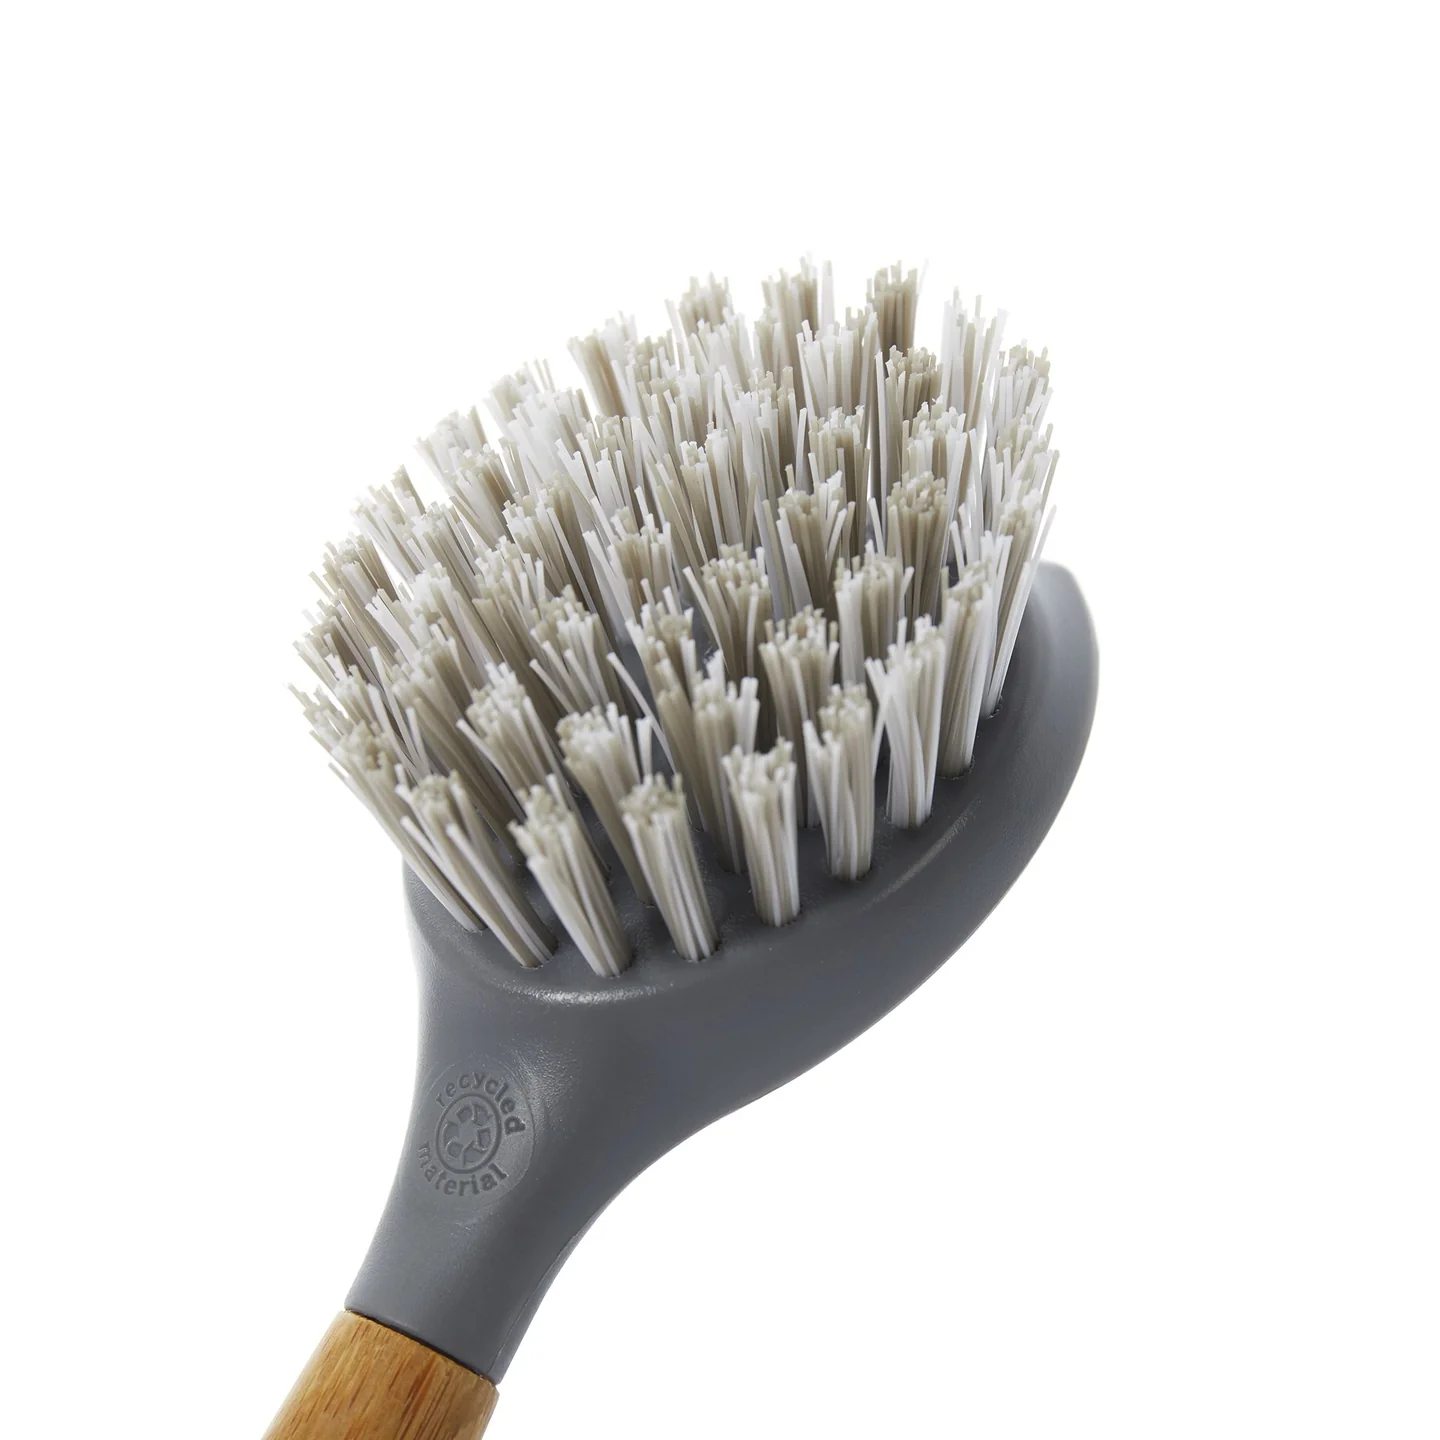 Full Circle Home - Tenacious C Cast Iron Brush and Scraper - Case of 6 - 1  Count, 6 Pack/1 Count Each - City Market